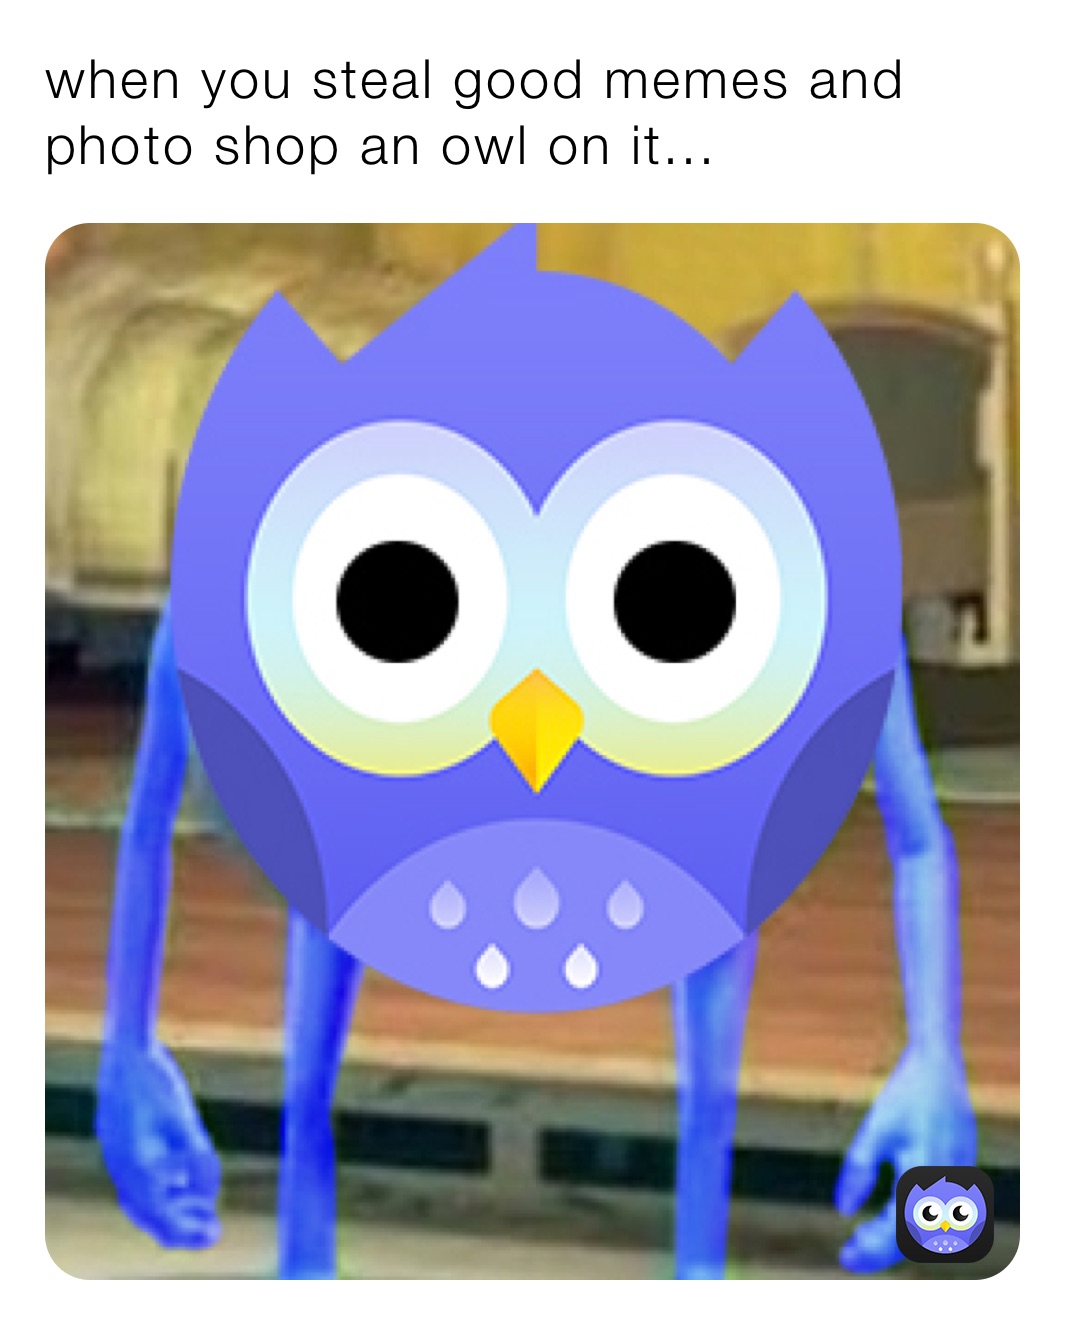 when you steal good memes and photo shop an owl on it...